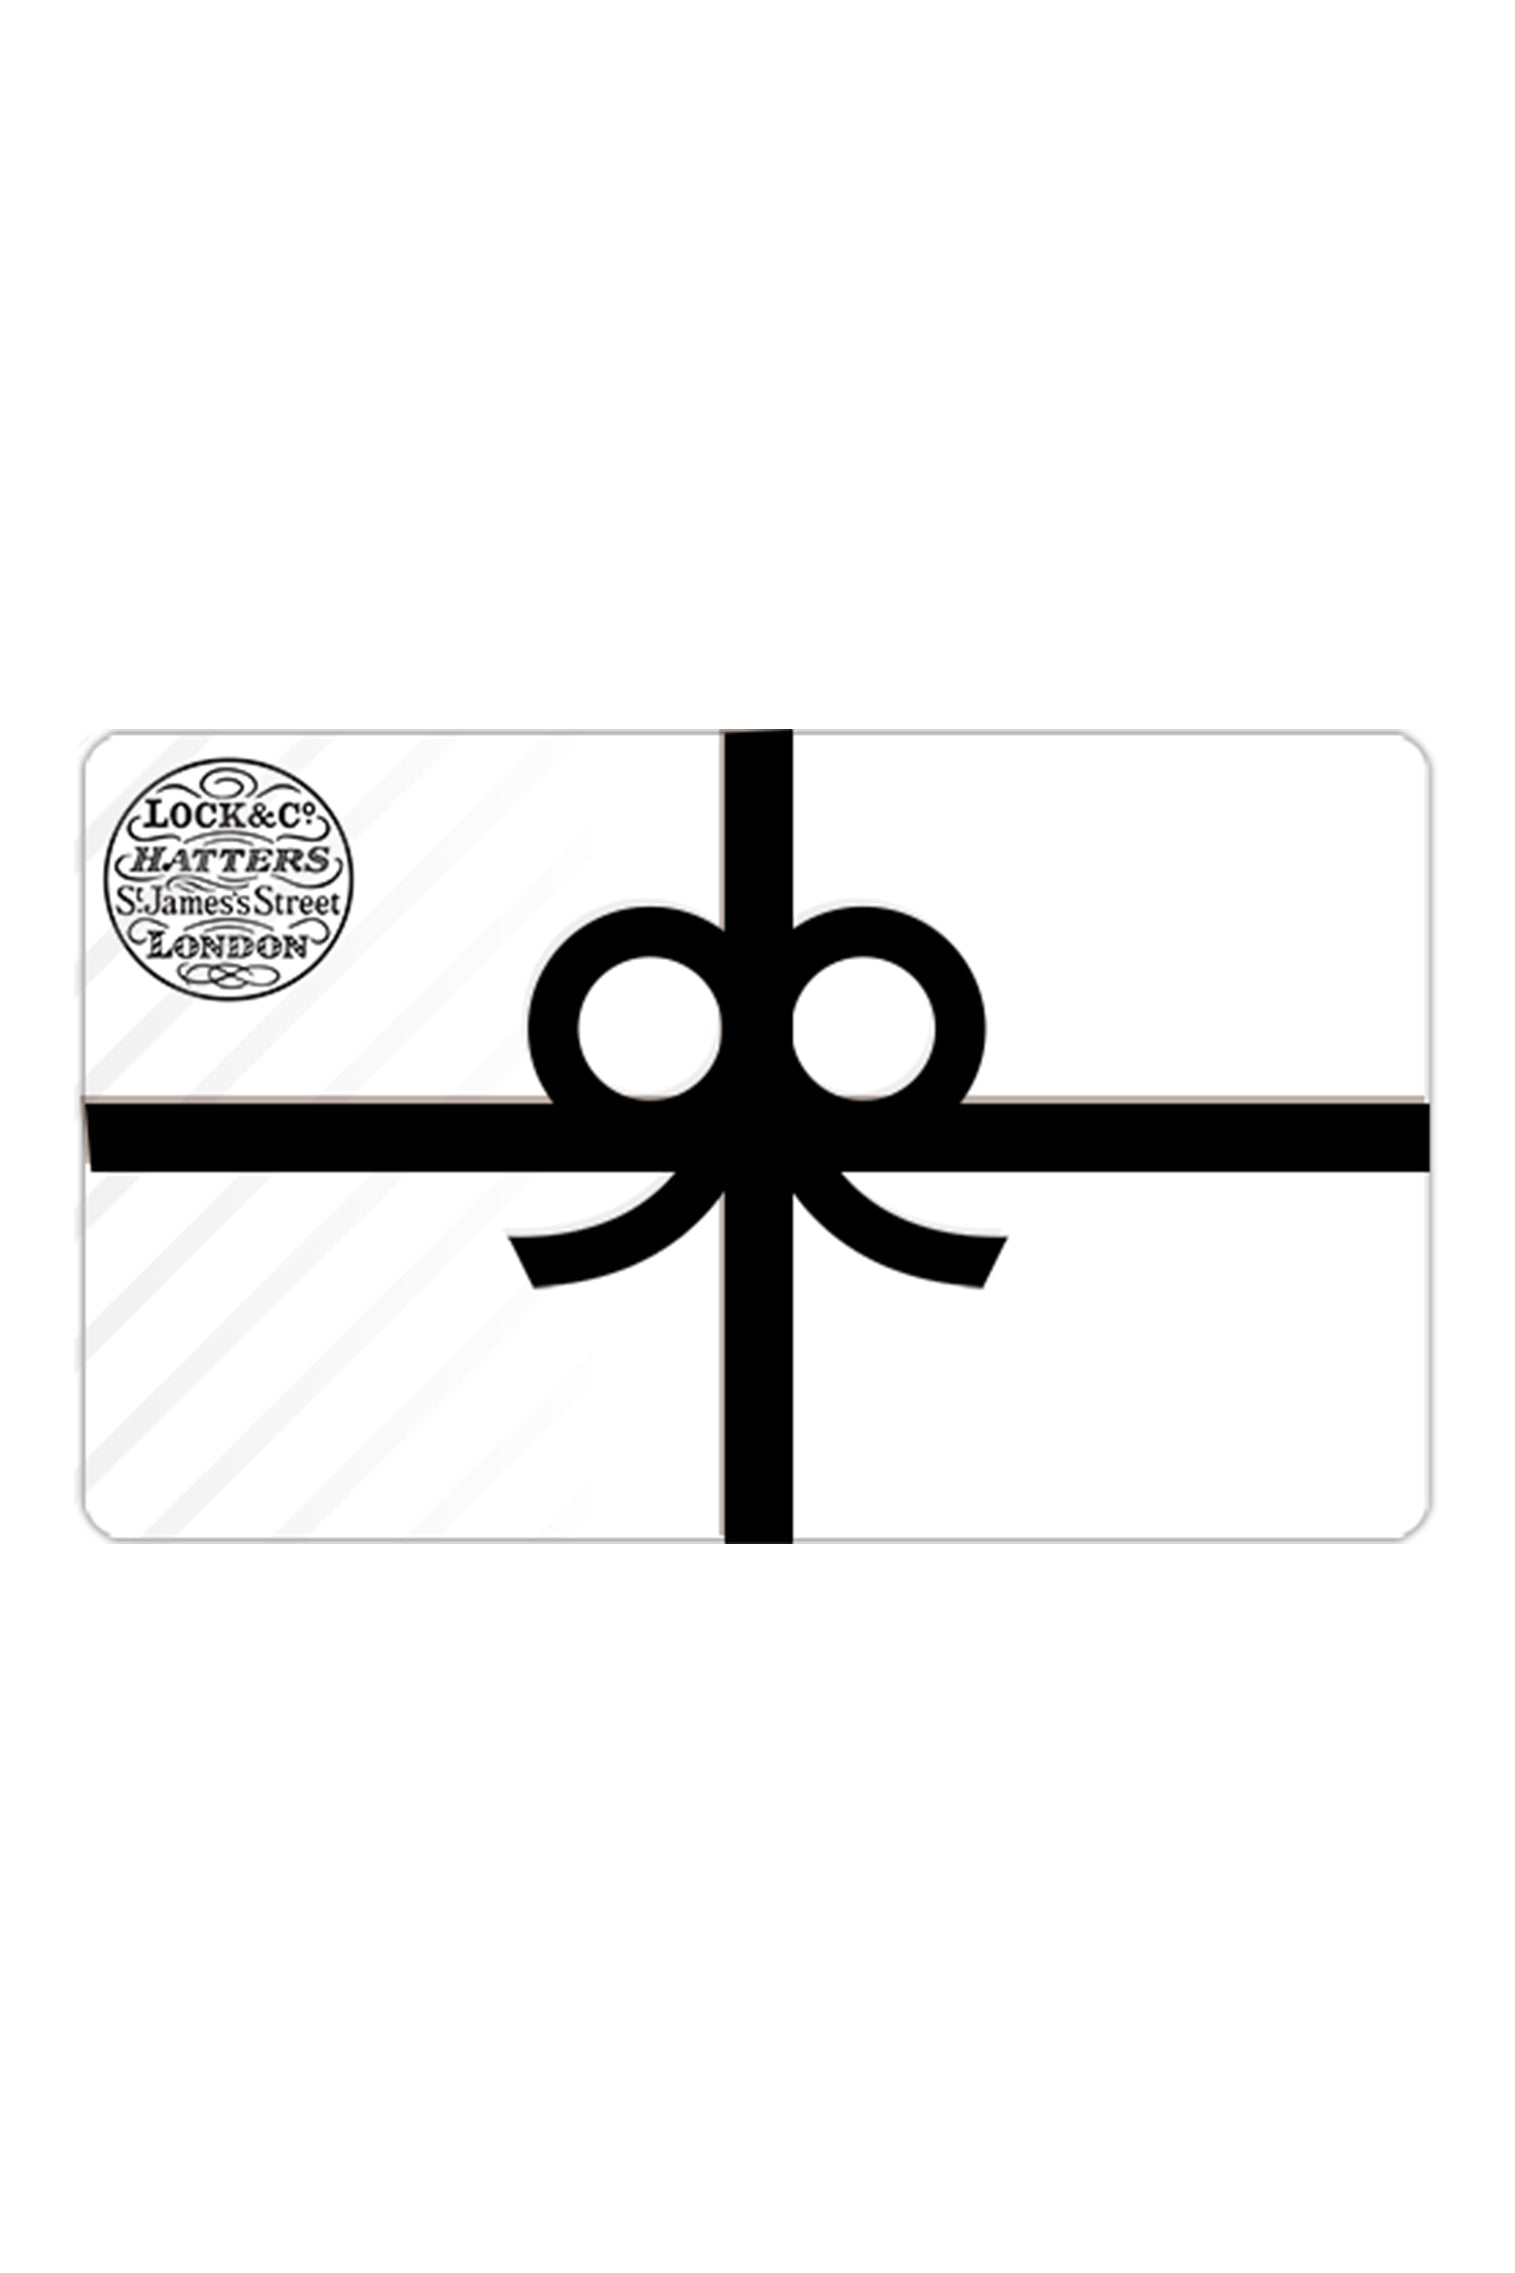 Lock & Co. Gift Card - Products - Lock & Co. Hatters London UK